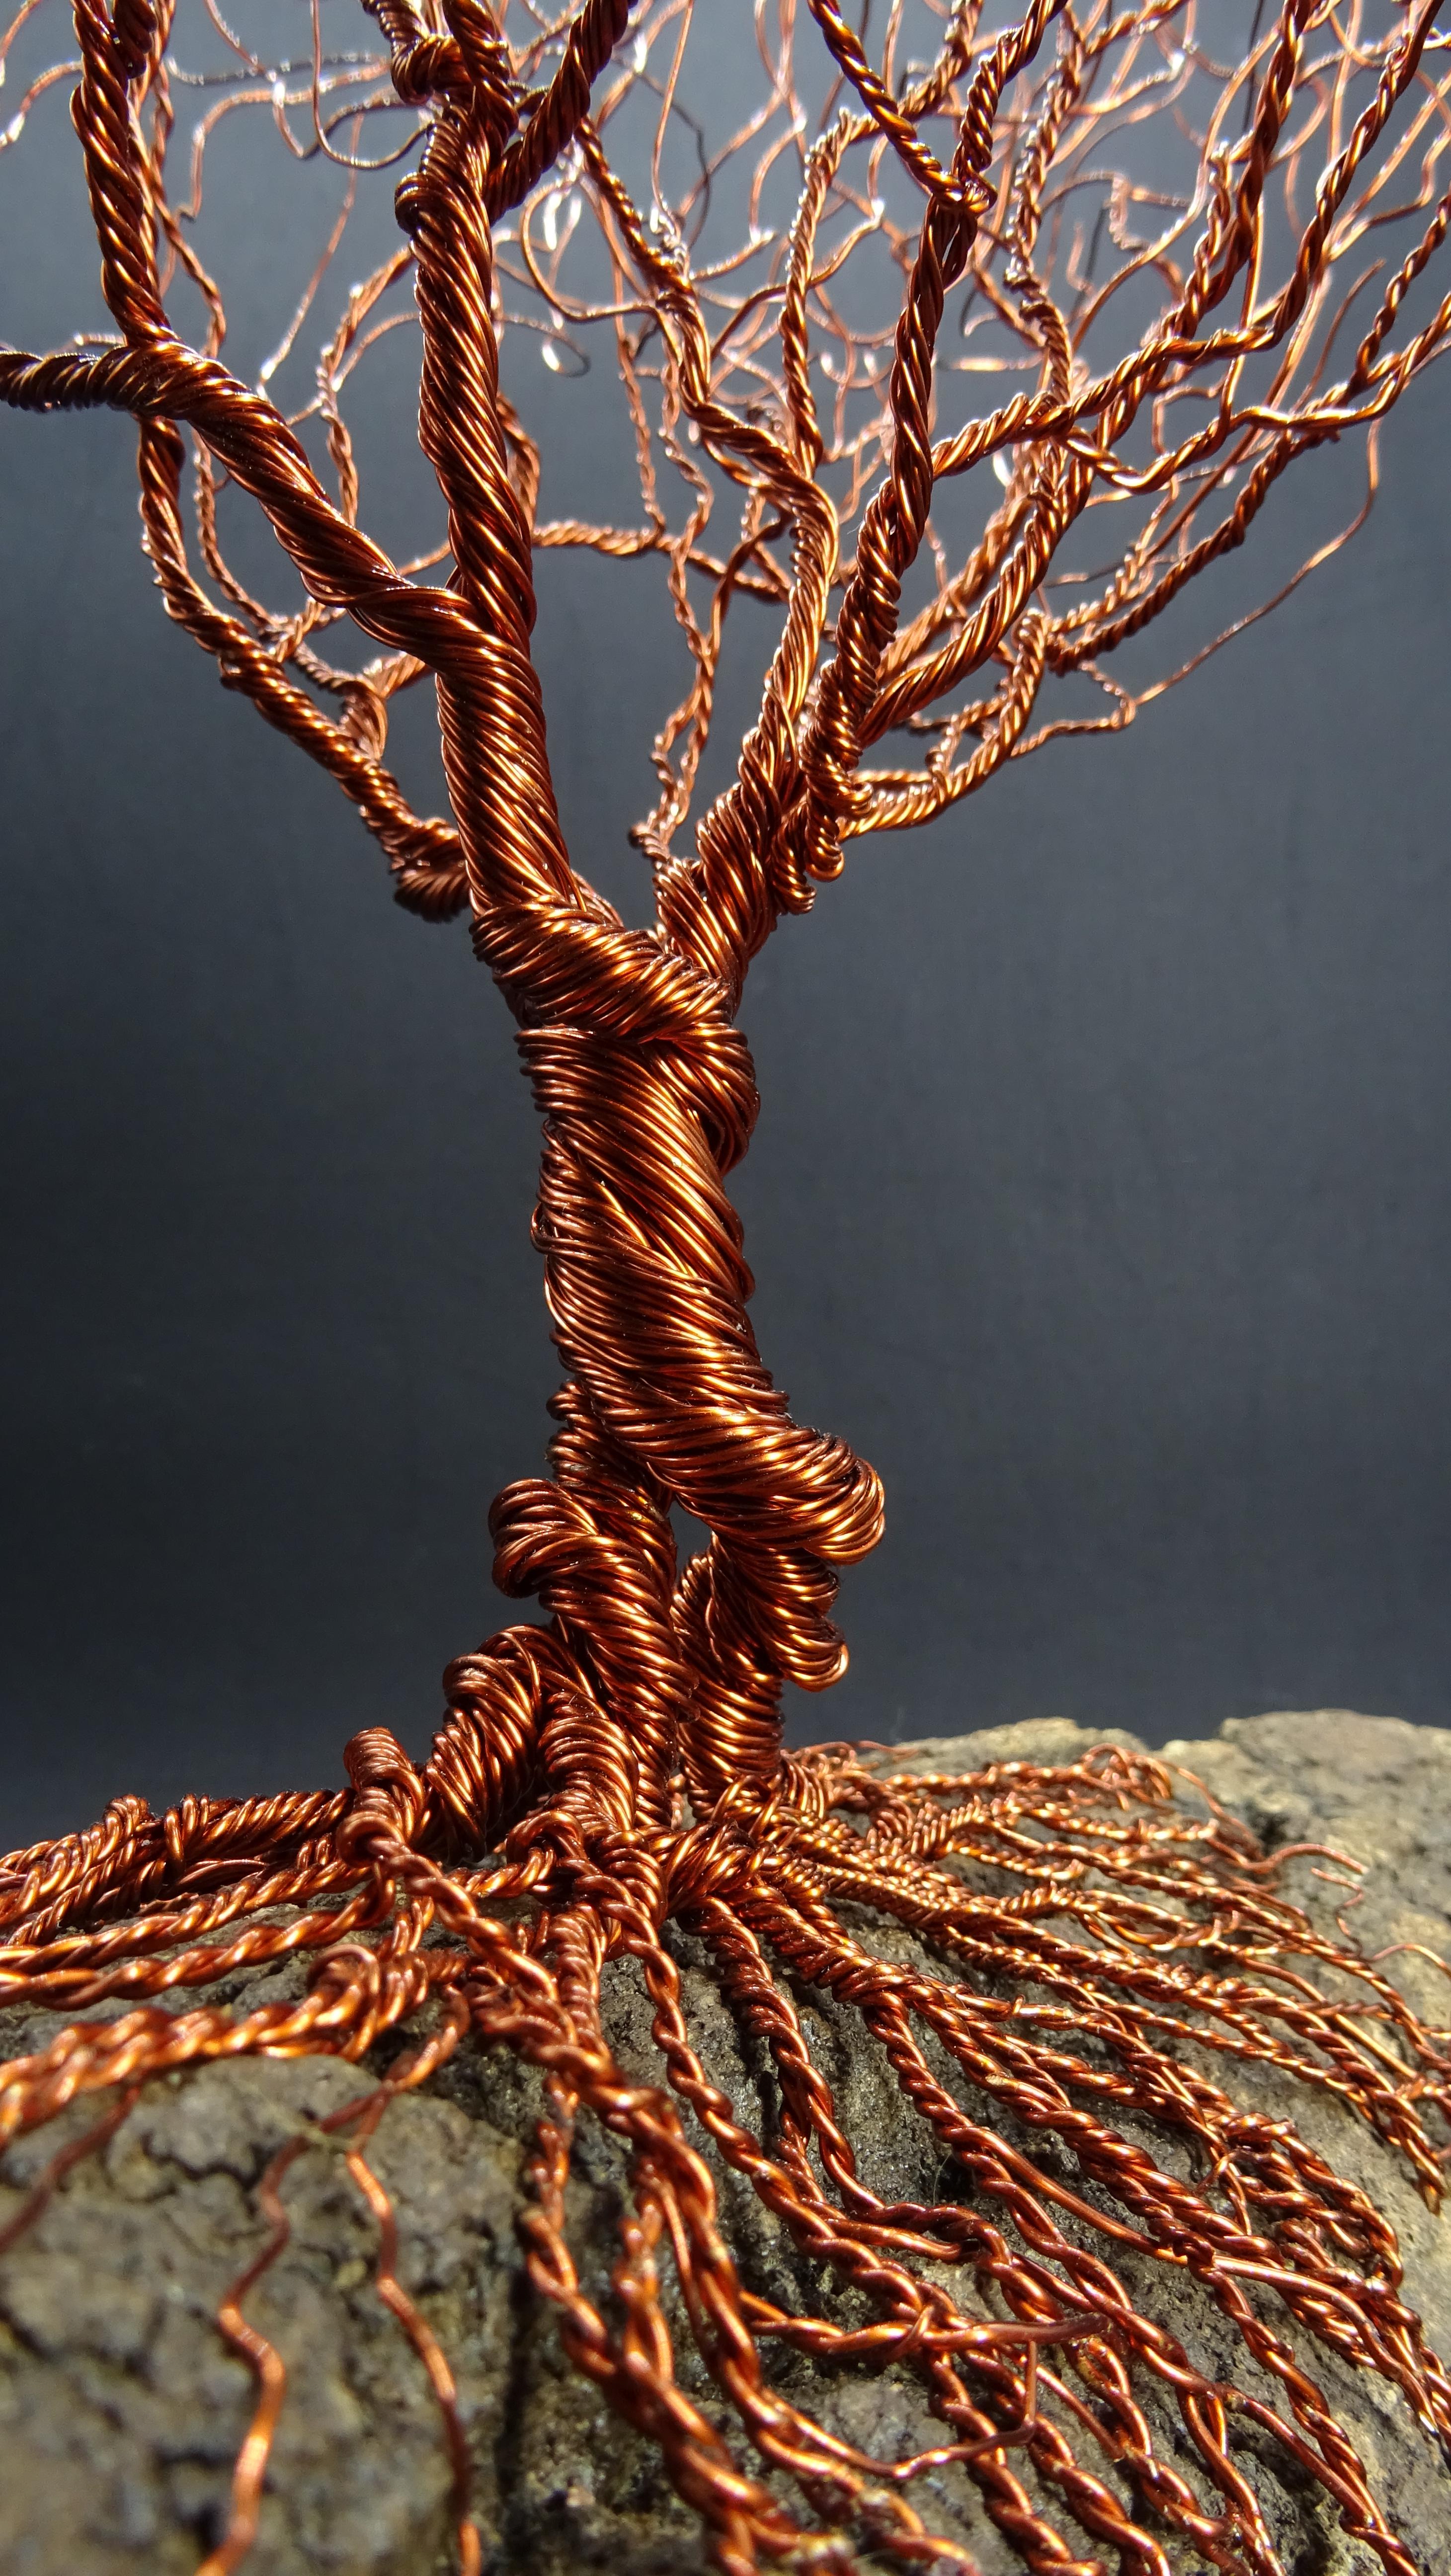 The Prickly Copper Bonsai is inspired by trees moved by a strong wind.
The materials are wood and metals, representing both the strength of life and the roots of Mother Nature.
Sculptures are composed by wires that intertwine each other